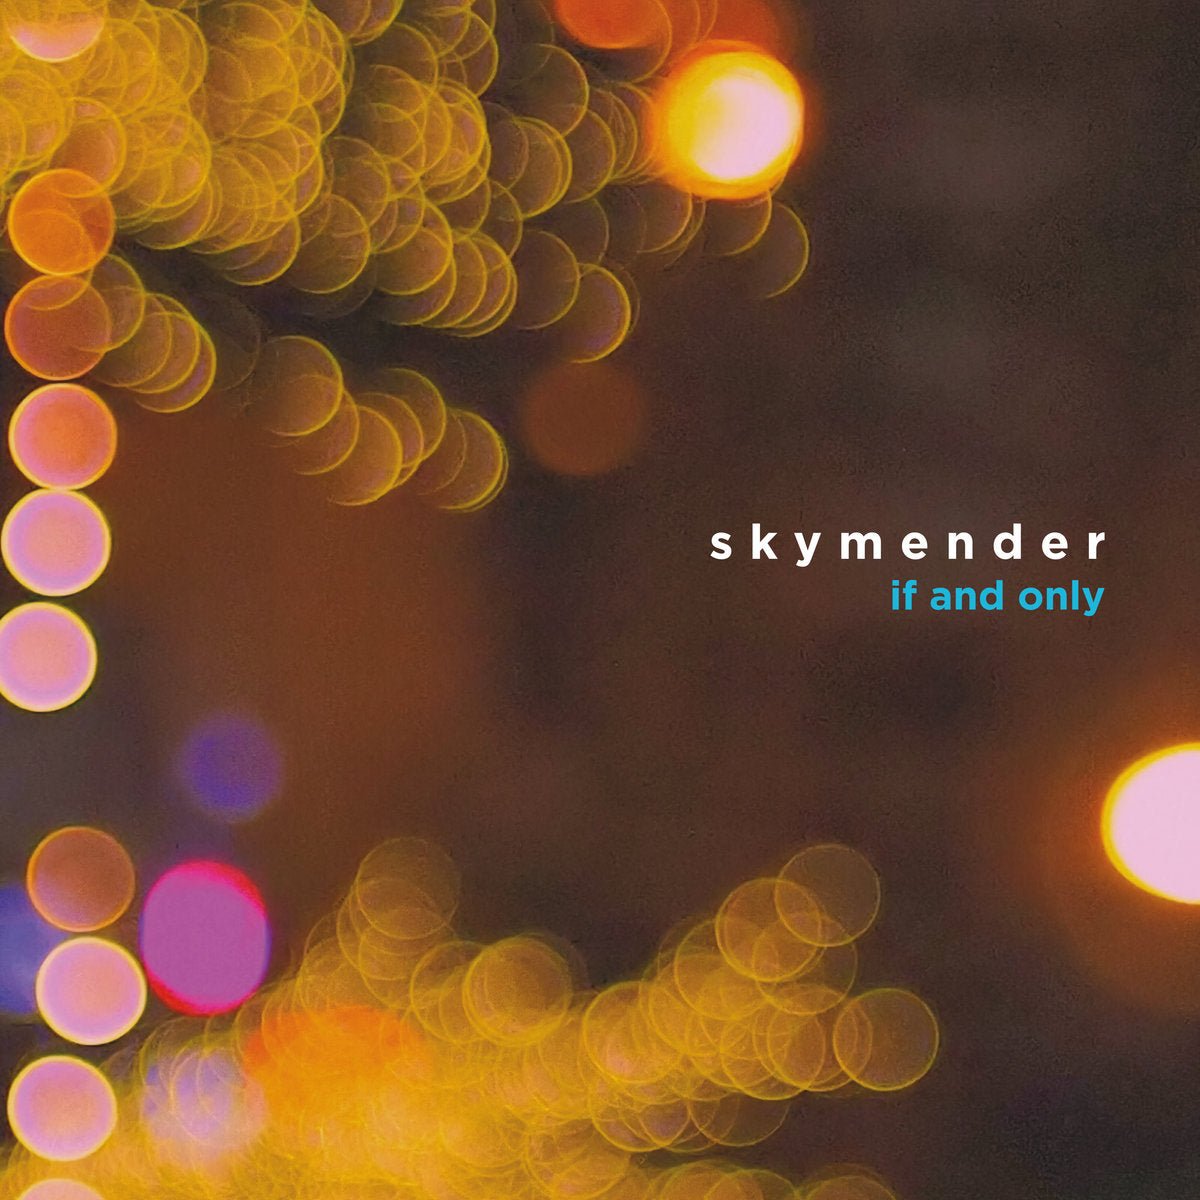 Skymender: If and Only: Orange Vinyl - Steadfast Records